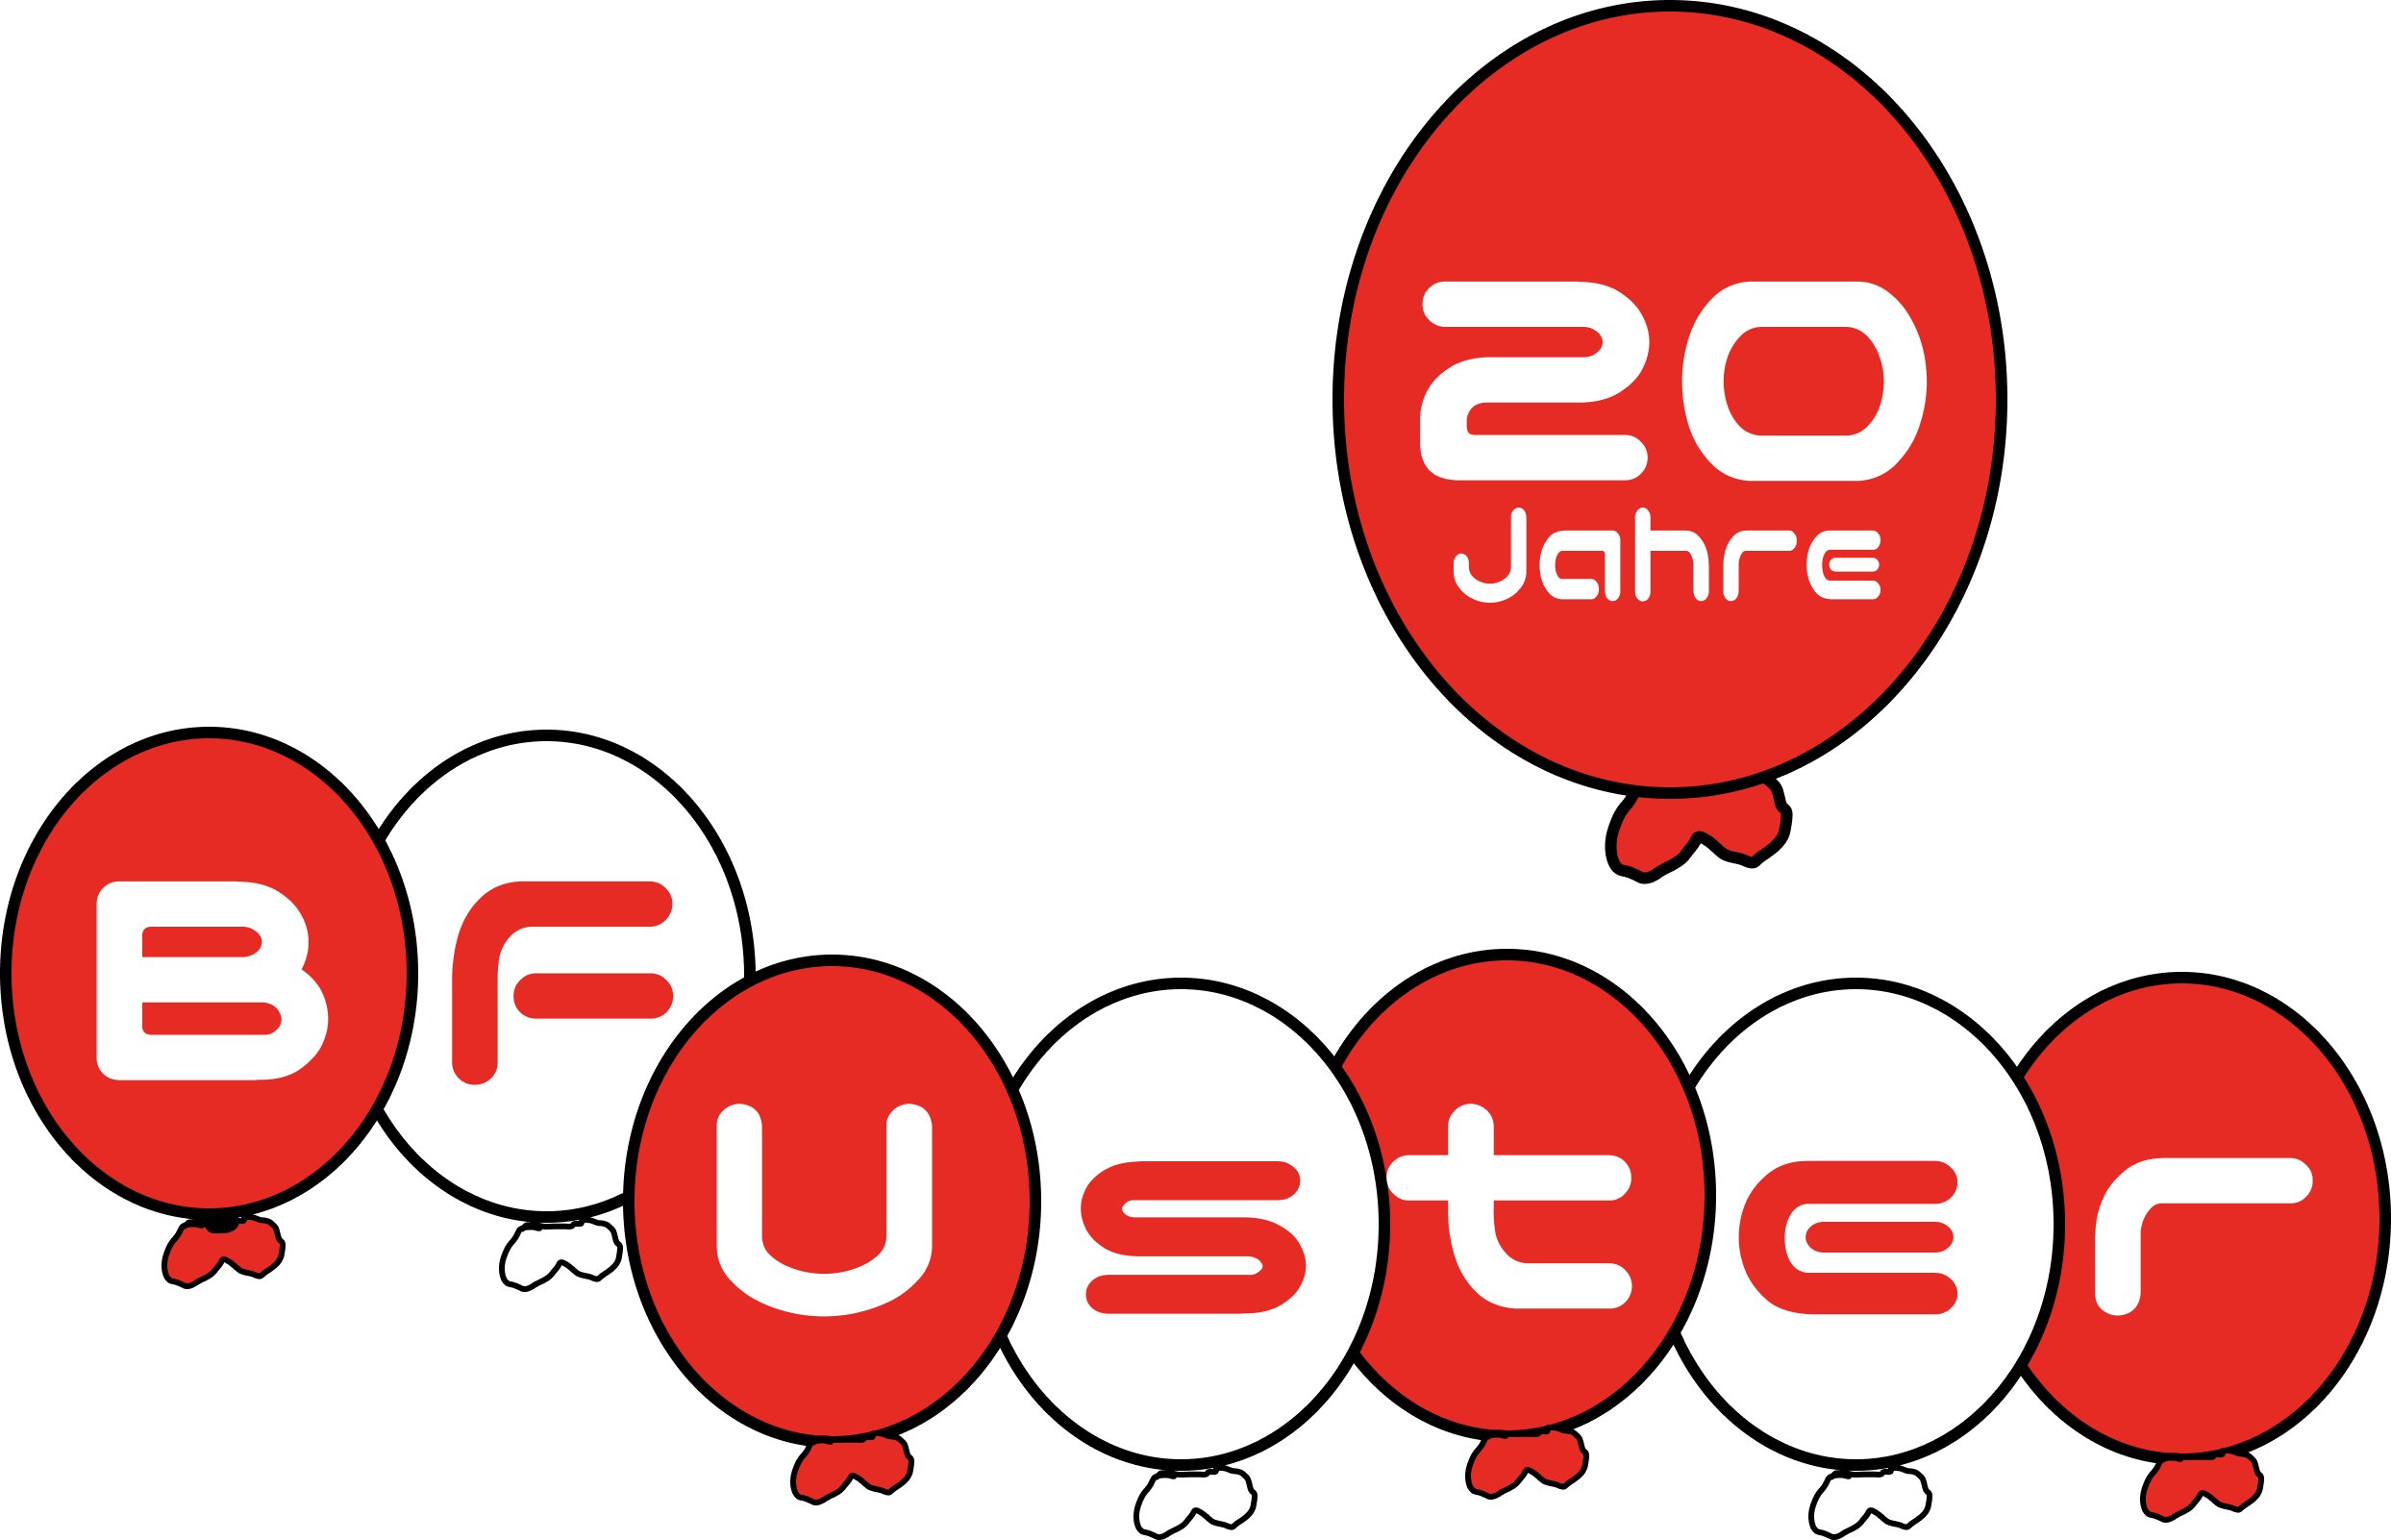 20 Jahre BF Uster